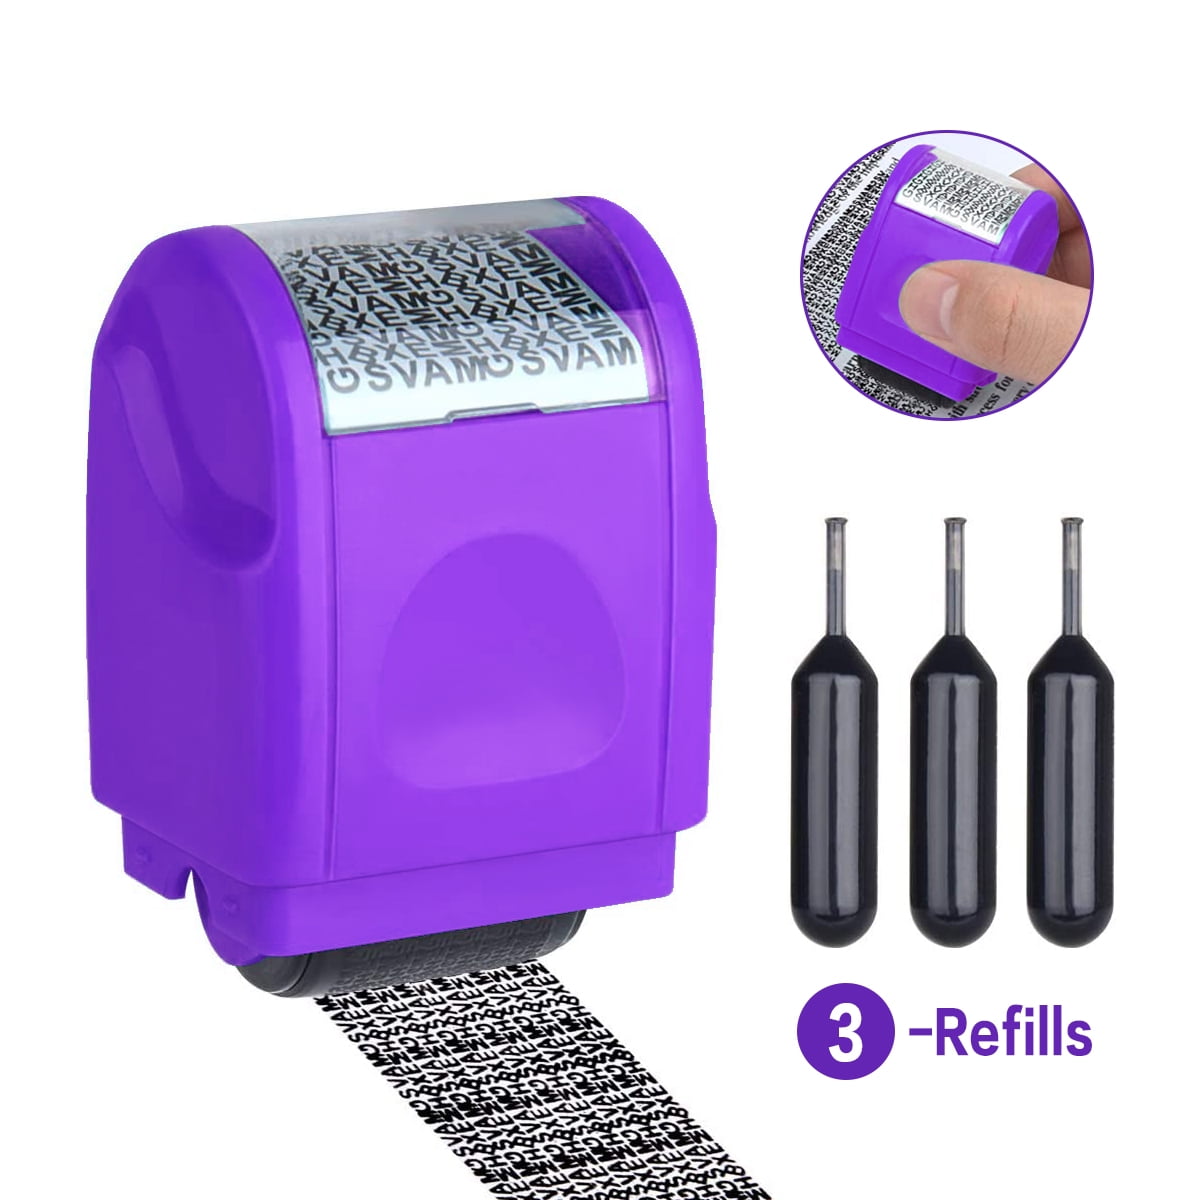 Plus Mini Identity Theft Protection Roller Stamp 